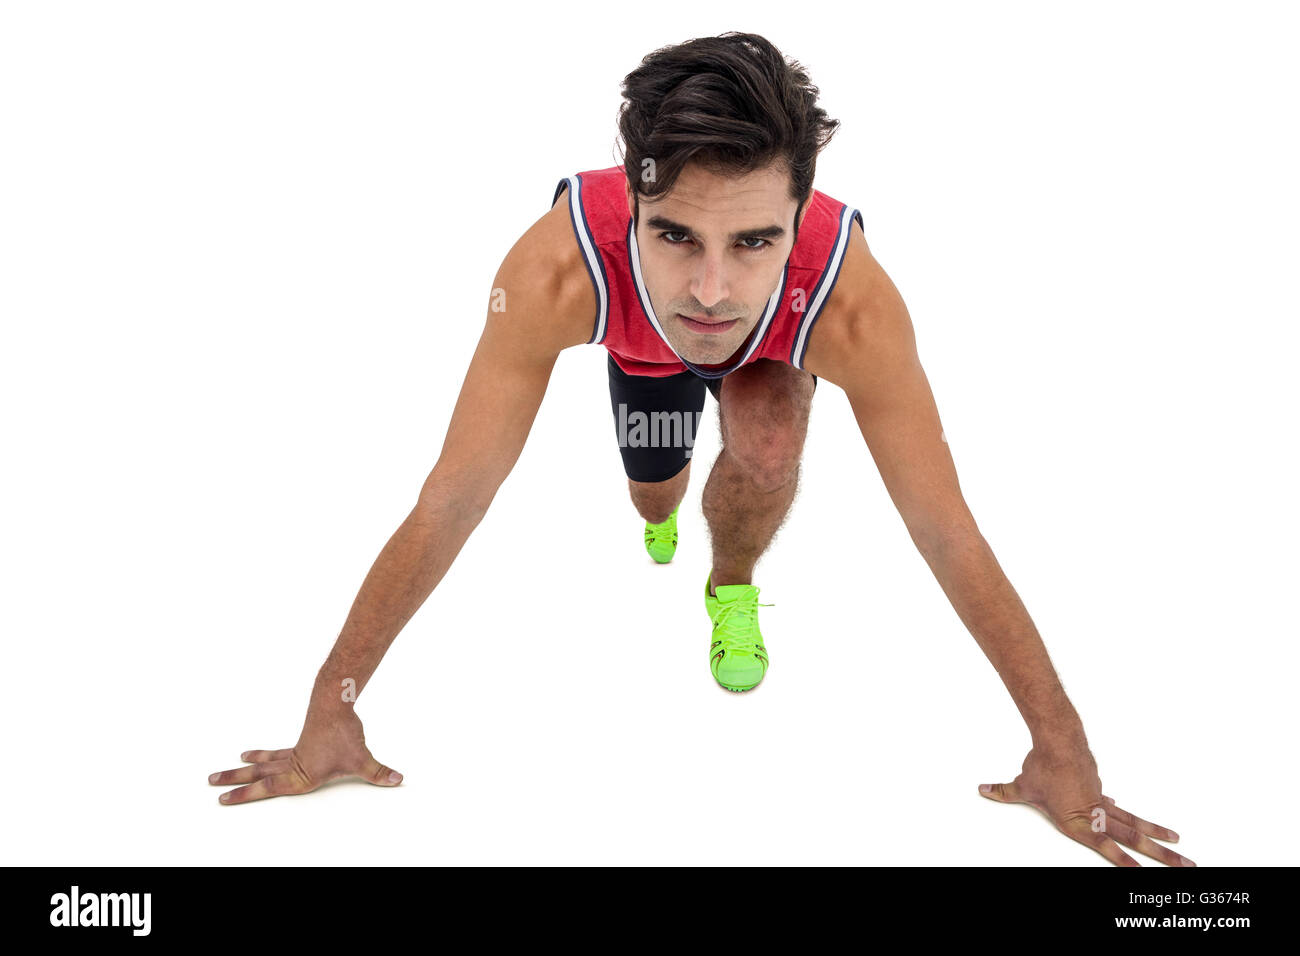 Portrait of male athlete in ready to run position Stock Photo